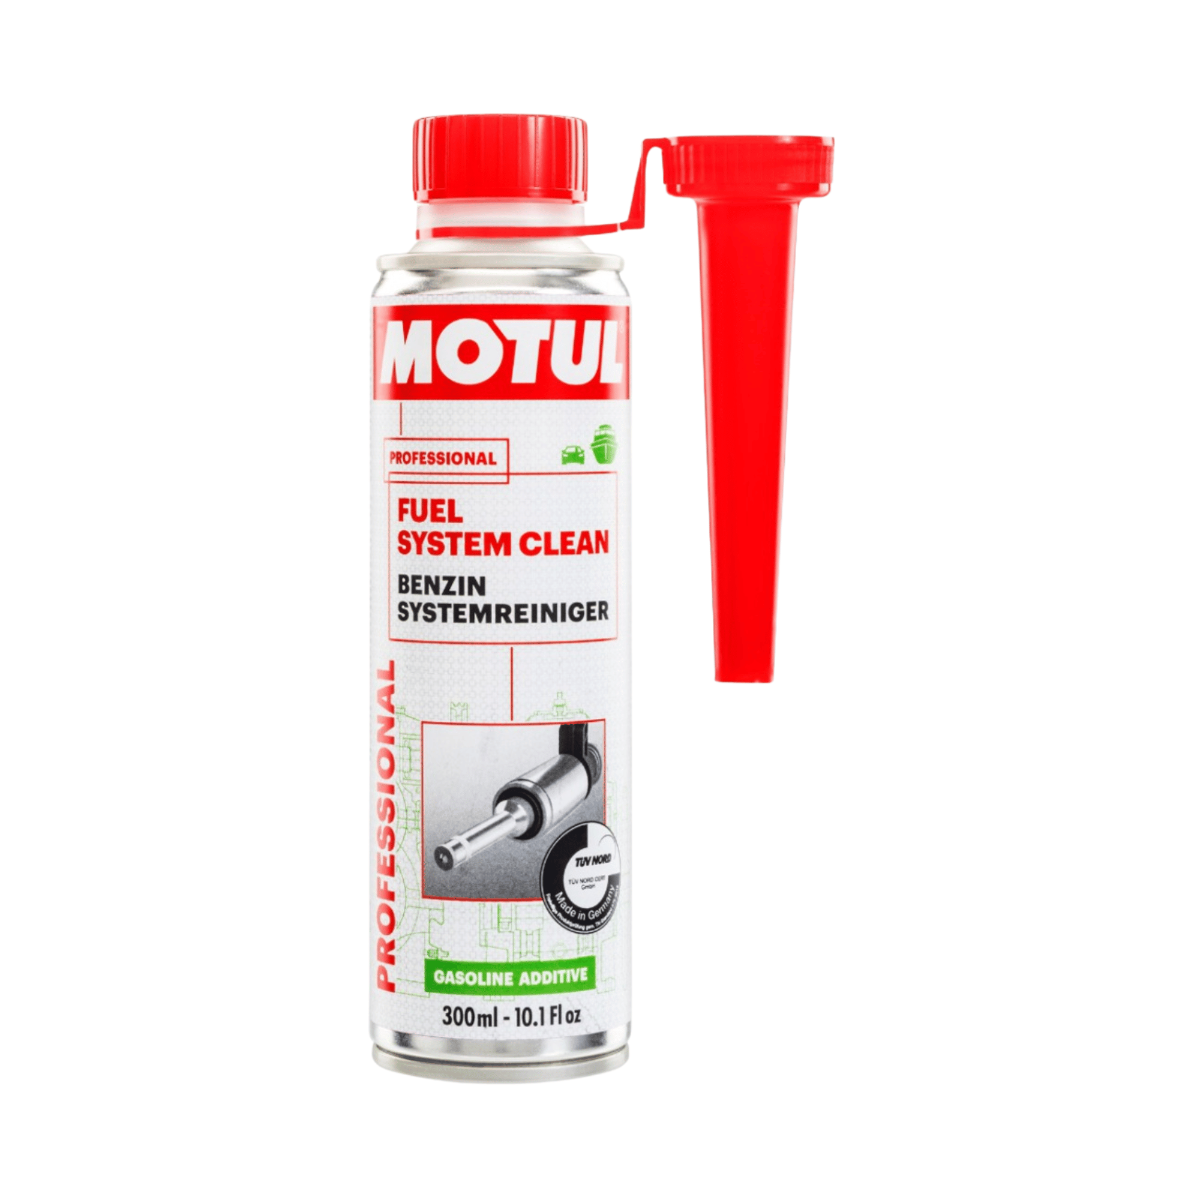 Buy Motul Professional Fuel System Clean 300 ml at ATO24 ❗